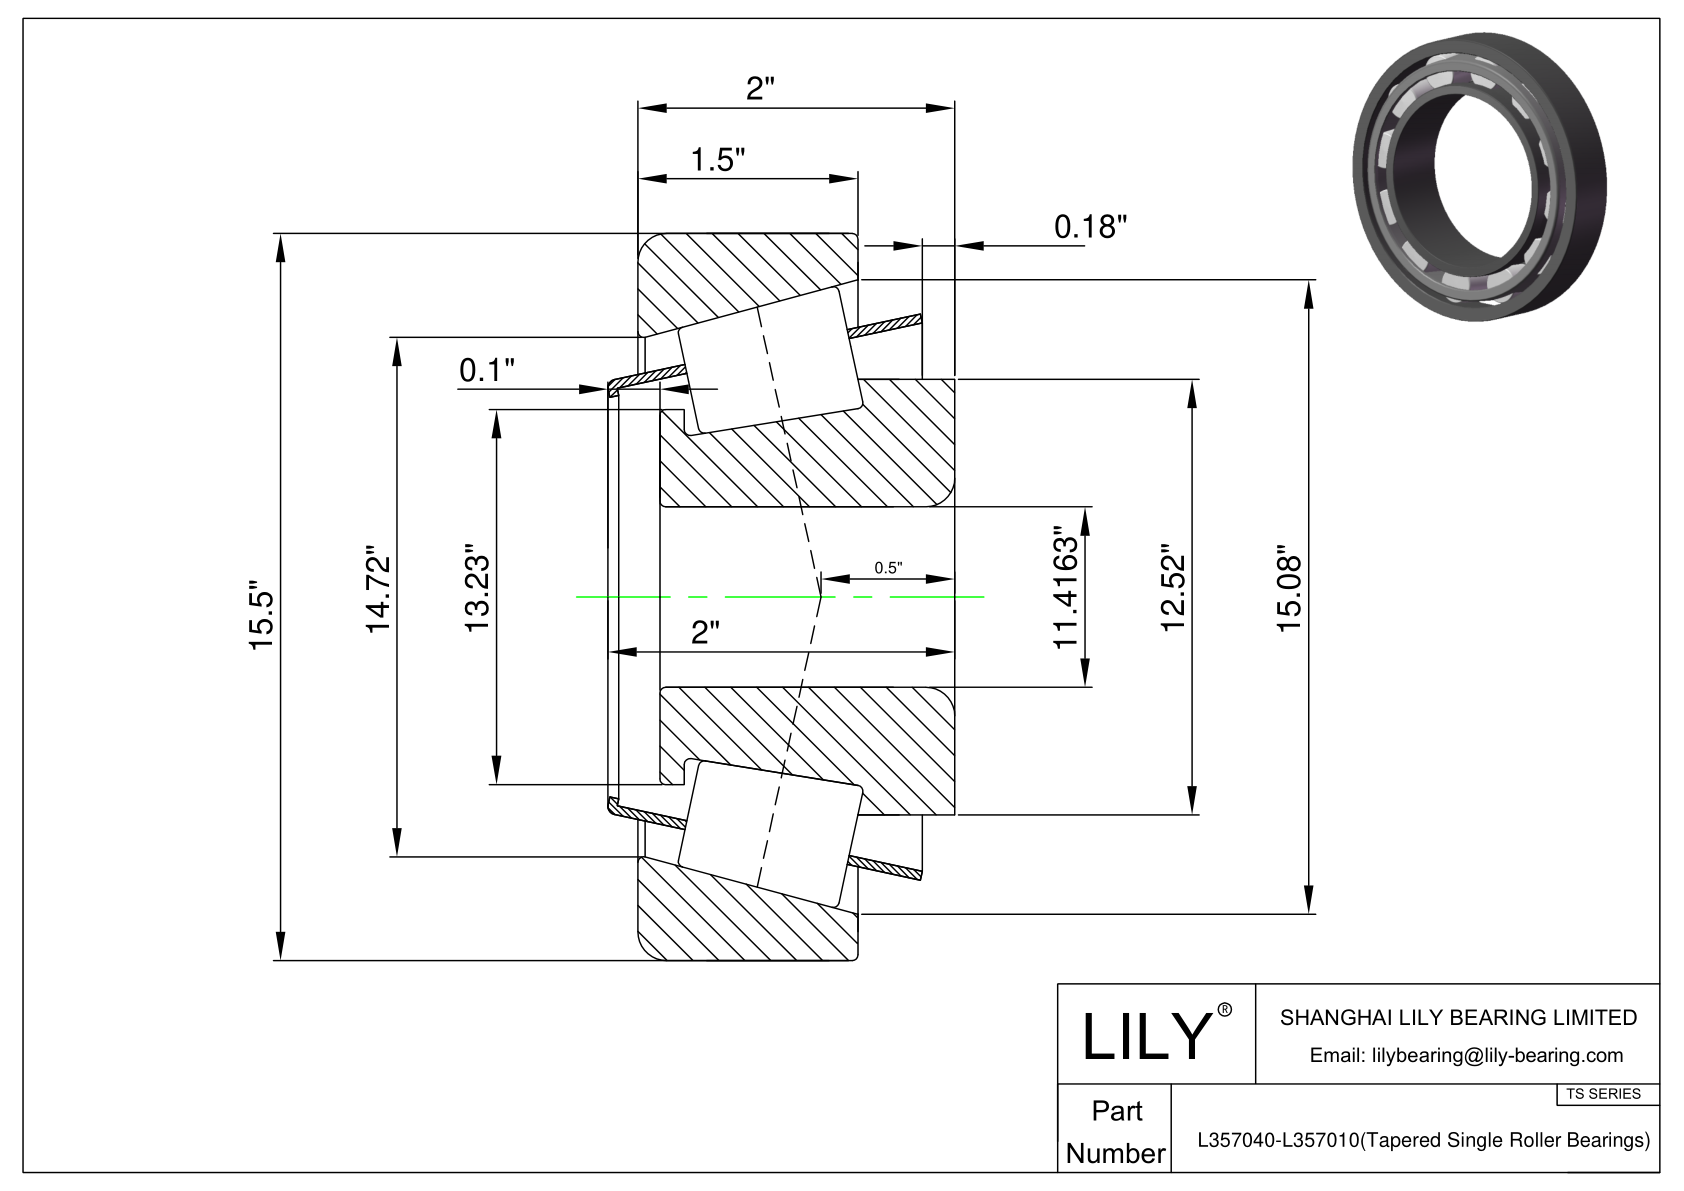 L357040-L357010 TS (Tapered Single Roller Bearings) (Imperial) cad drawing